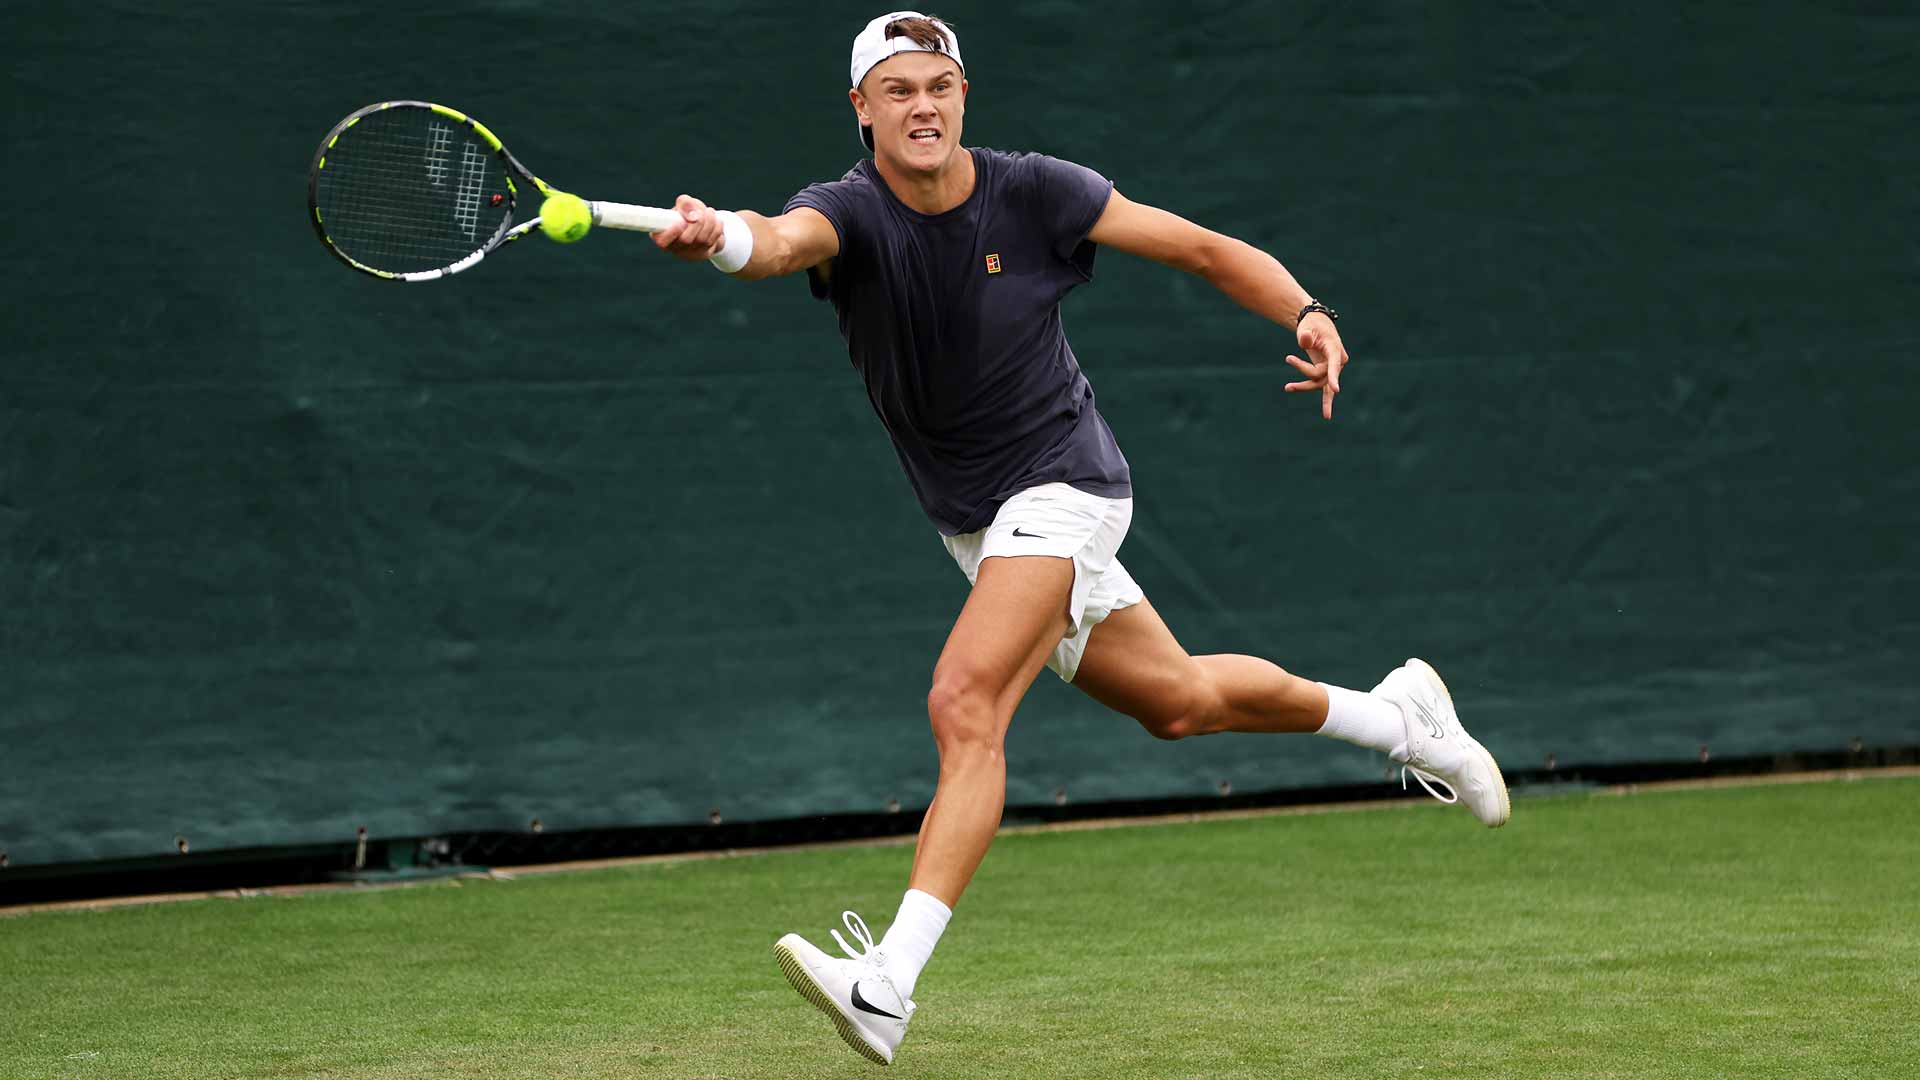 Holger Rune practised Tuesday at Wimbledon, where he will compete for the second time.